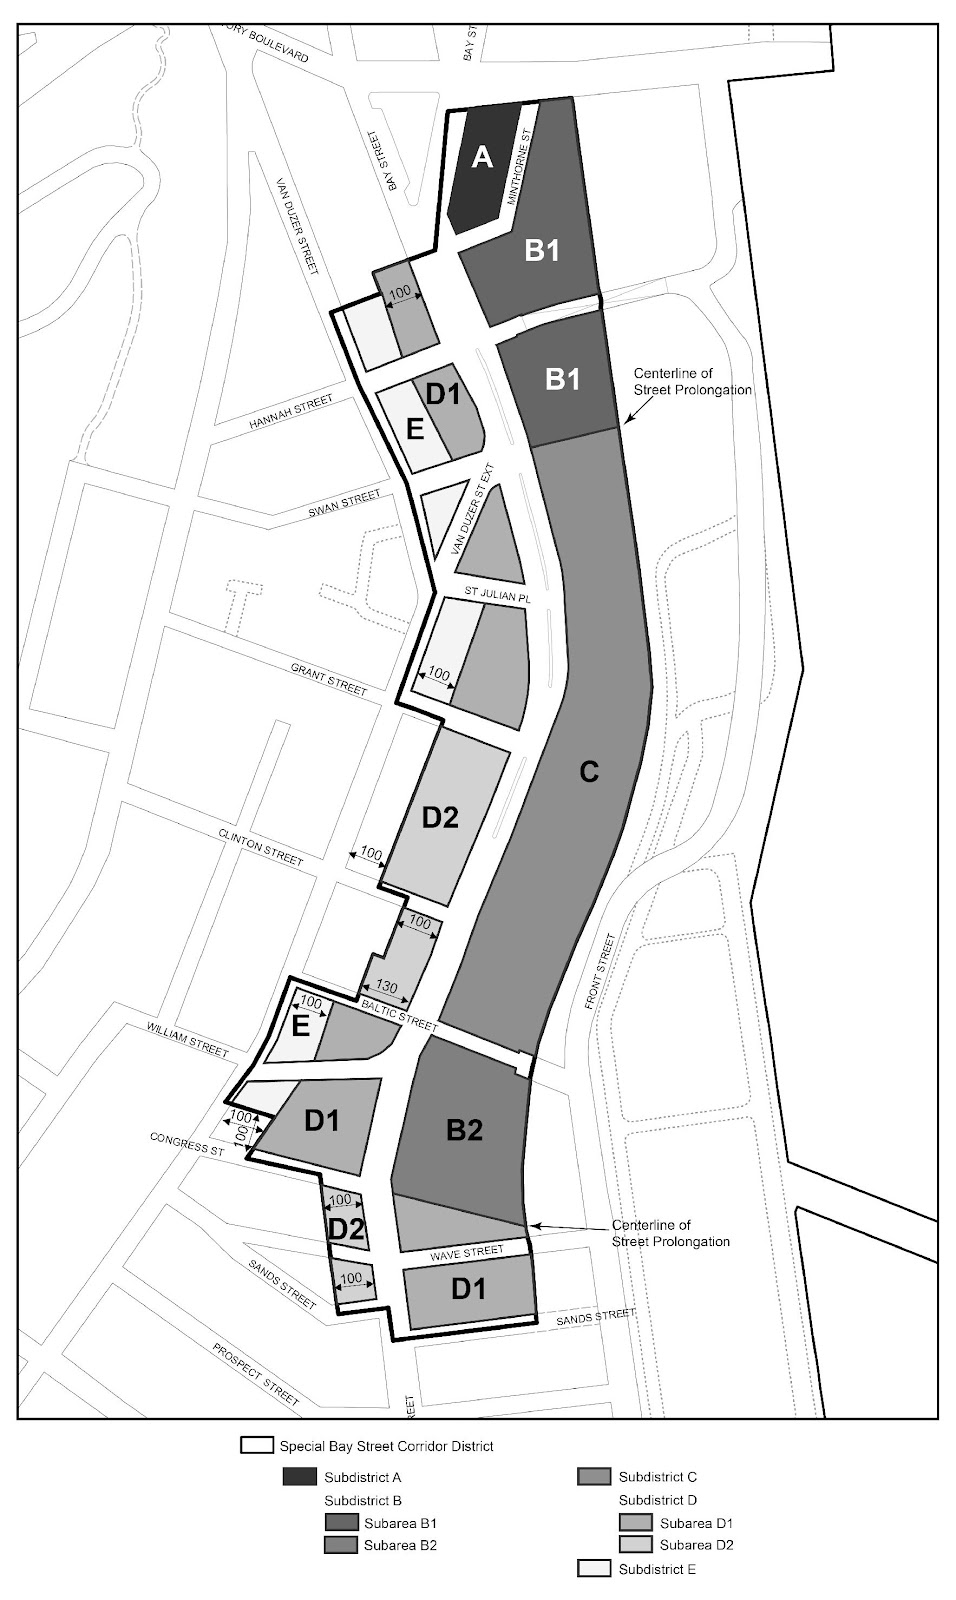 Zoning Resolutions Chapter 5: Special Bay Street Corridor District APPENDIX A.0